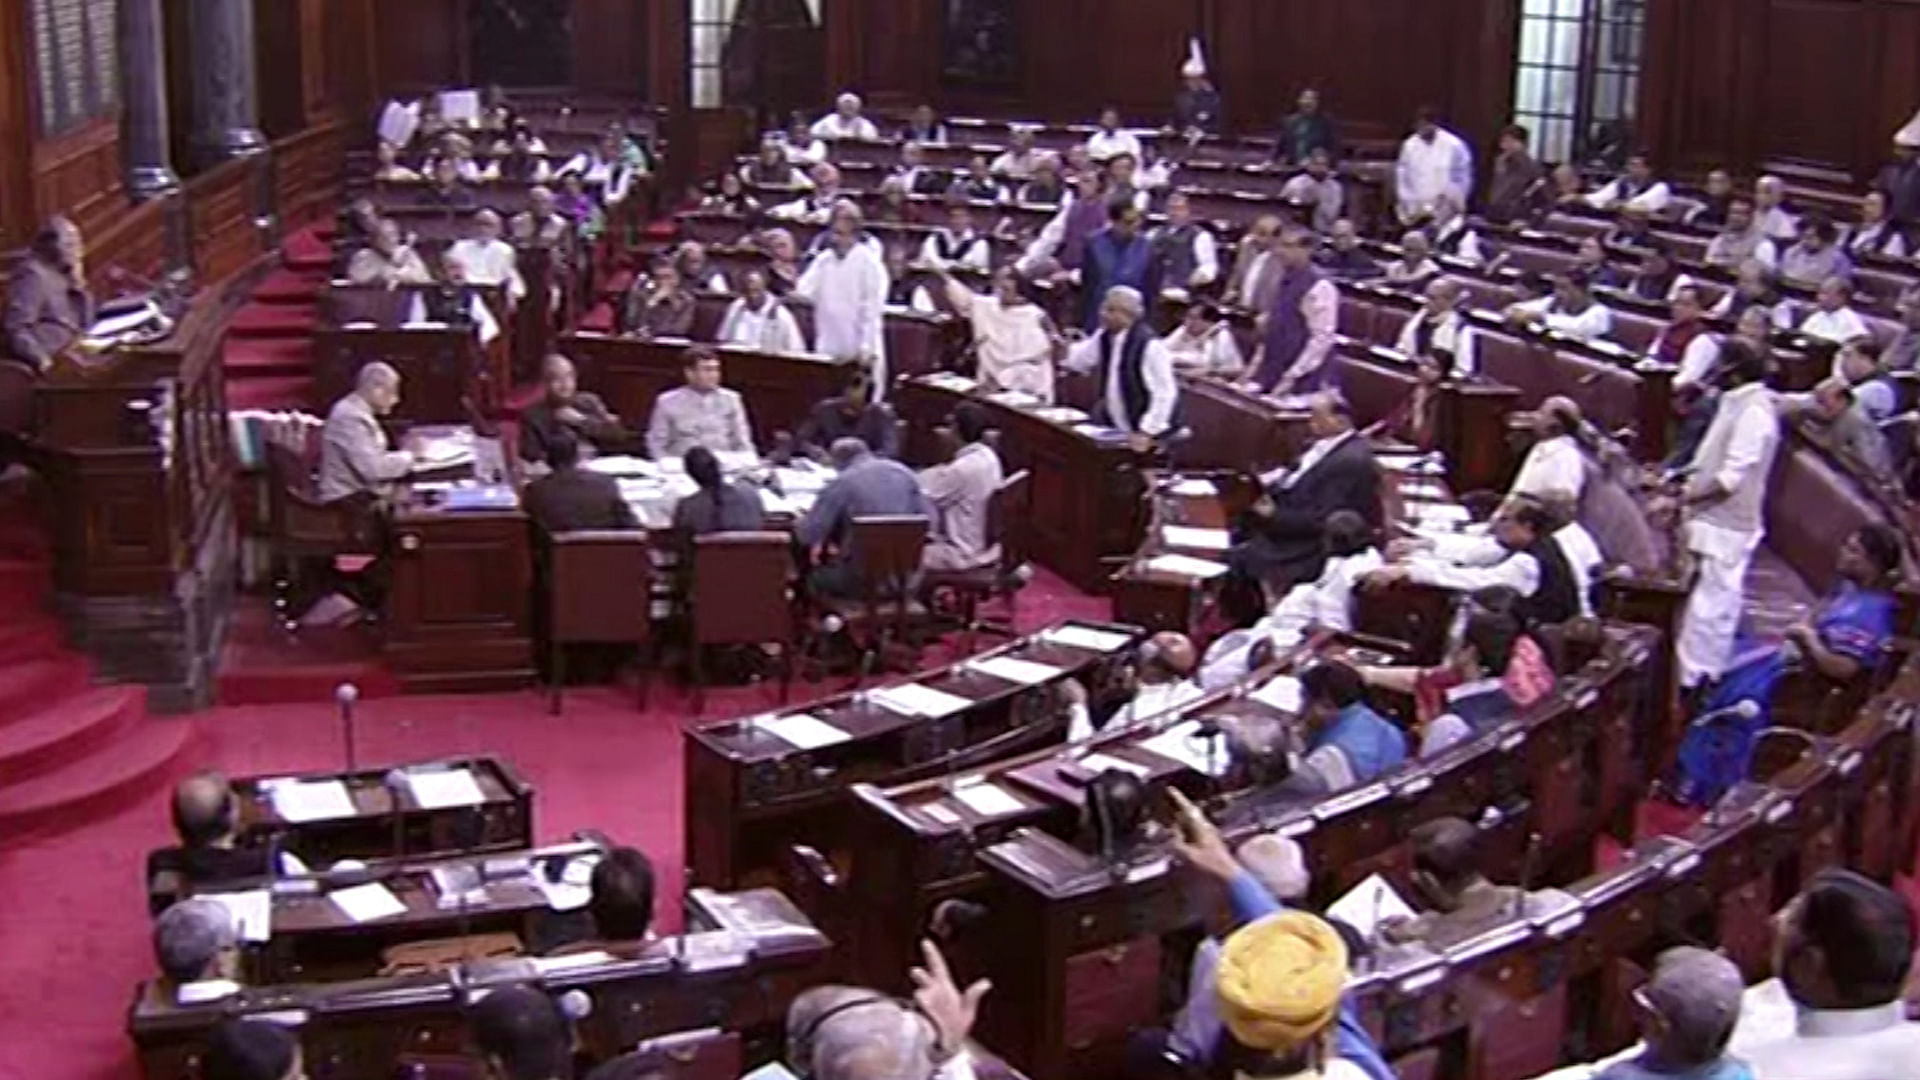 Opposition members demand the presence of the Prime Minister in Rajya Sabha. (Photo: RSTV screengrab)